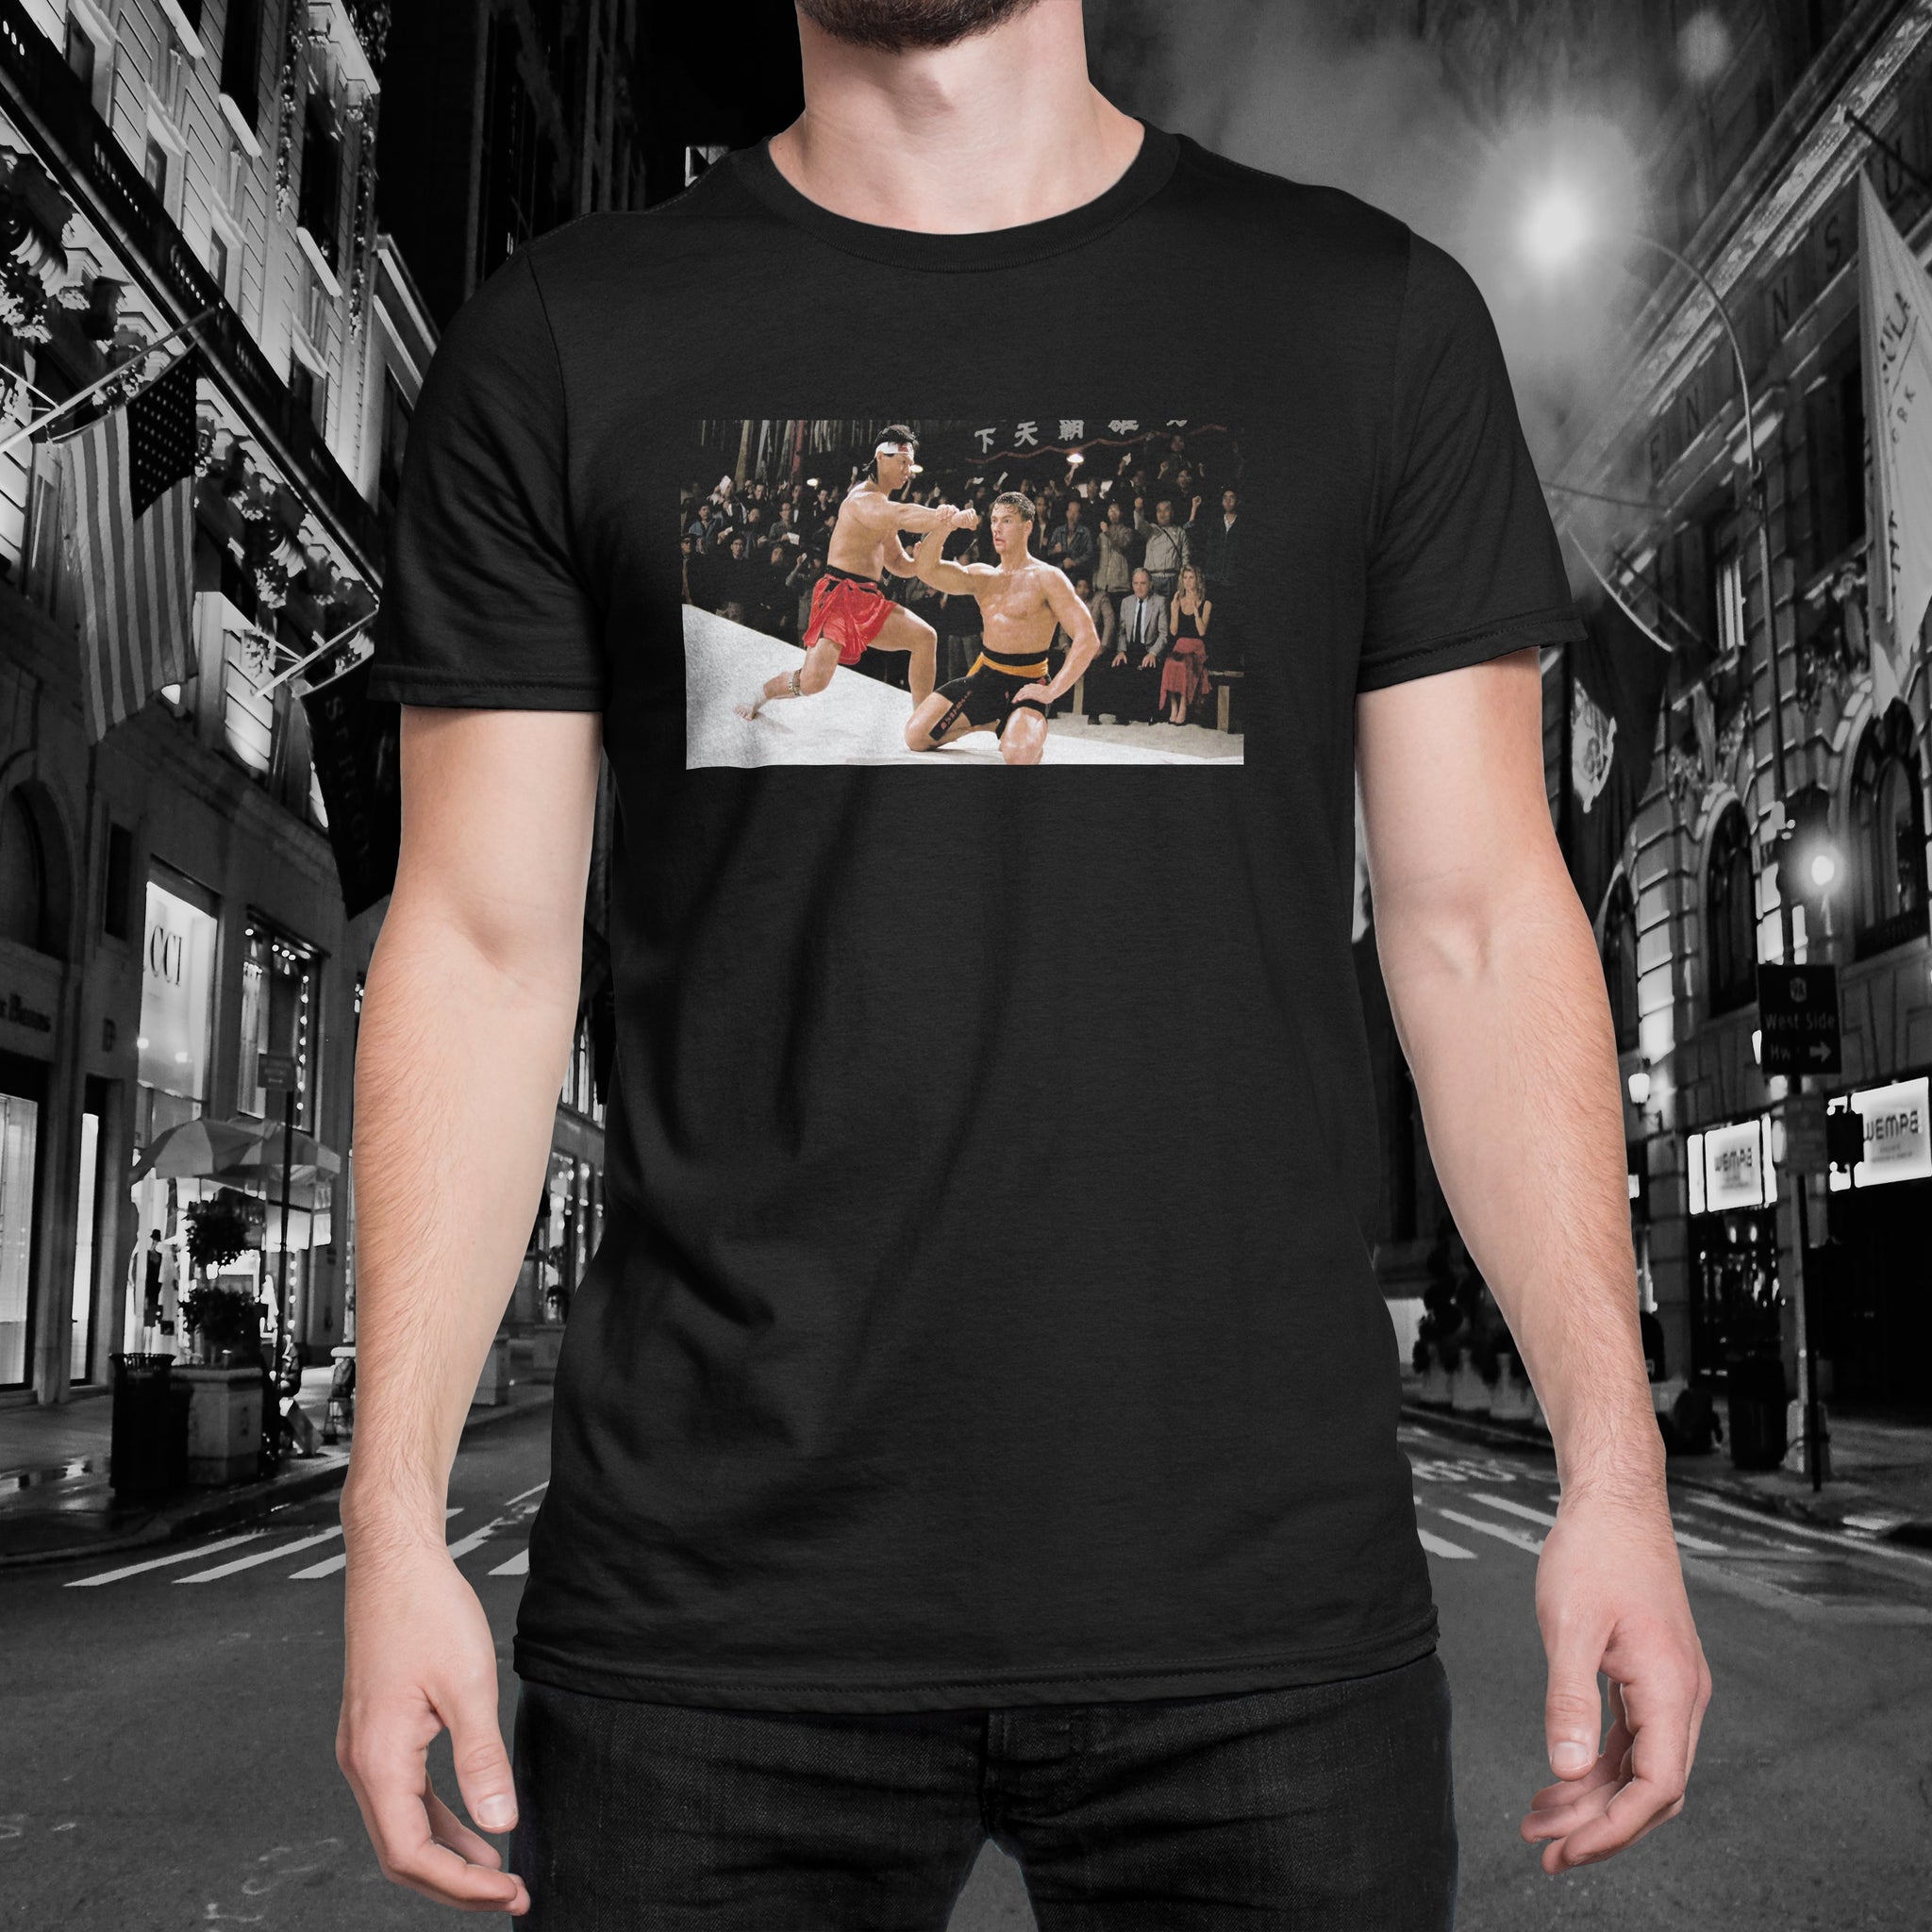 Bloodsport "Blinded by the Li" Tee